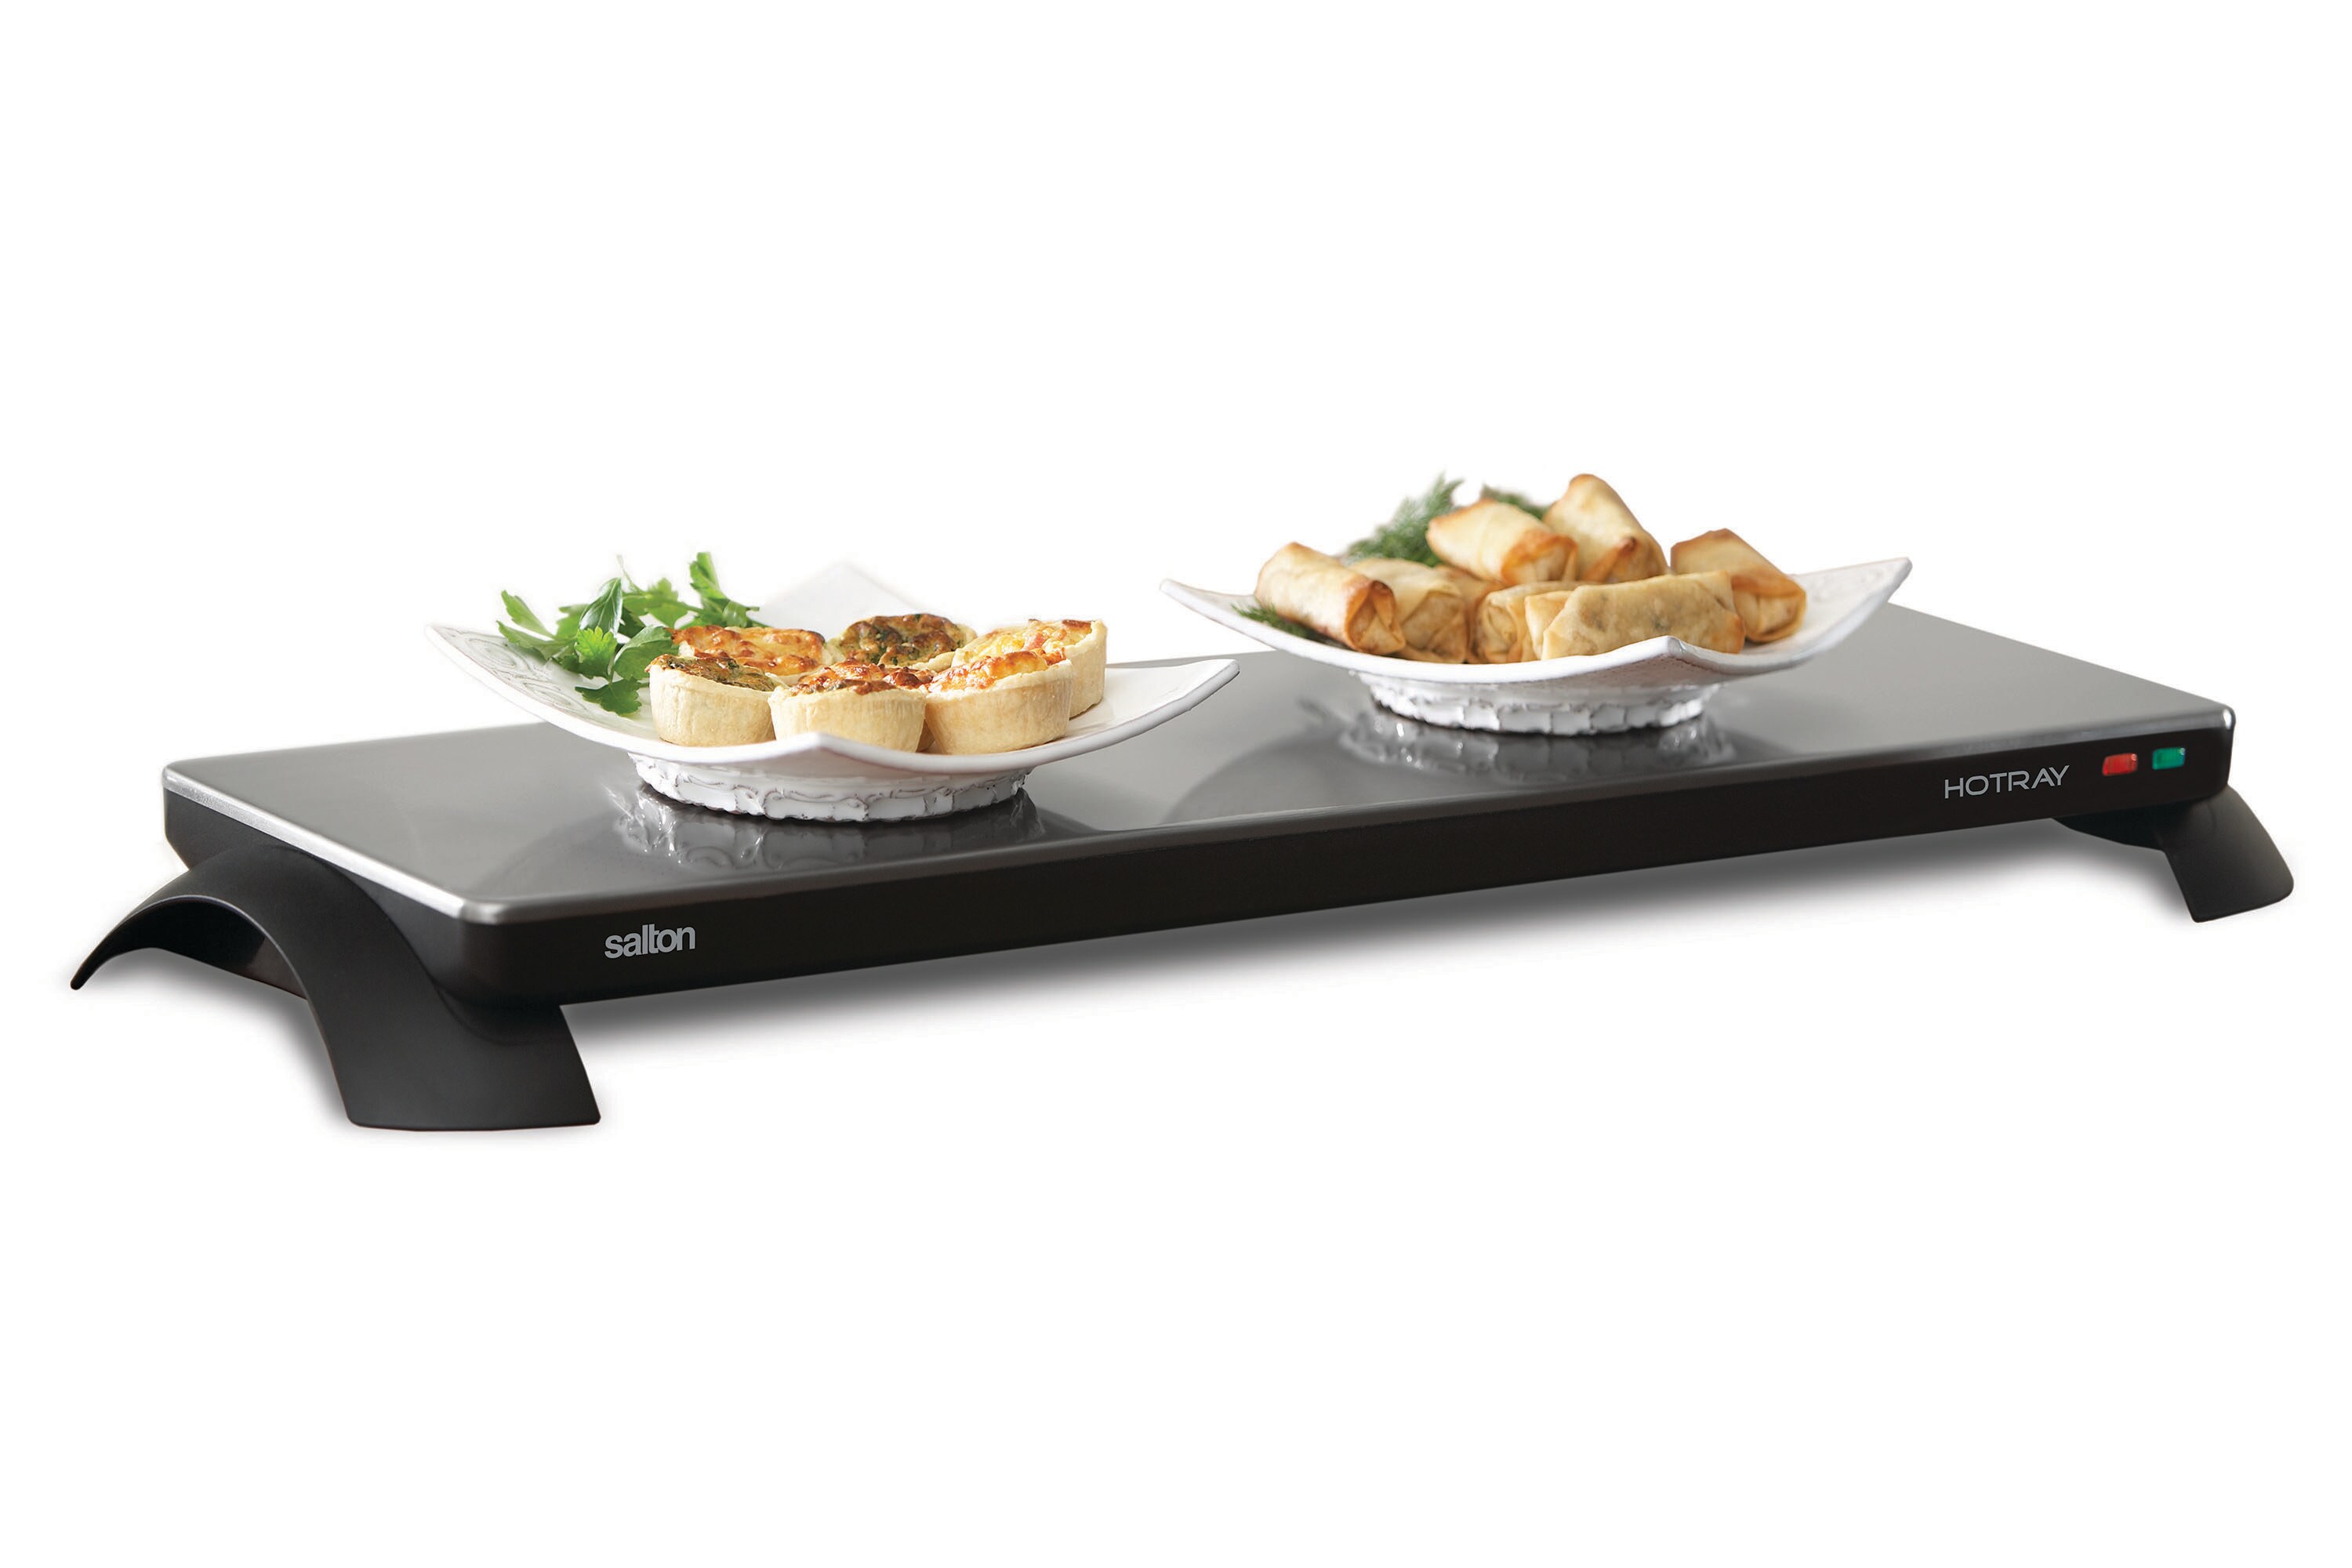 Jeremy Cass 14.57-in 2 Elements Stainless Steel Electric Hot Plate | GZCM0806